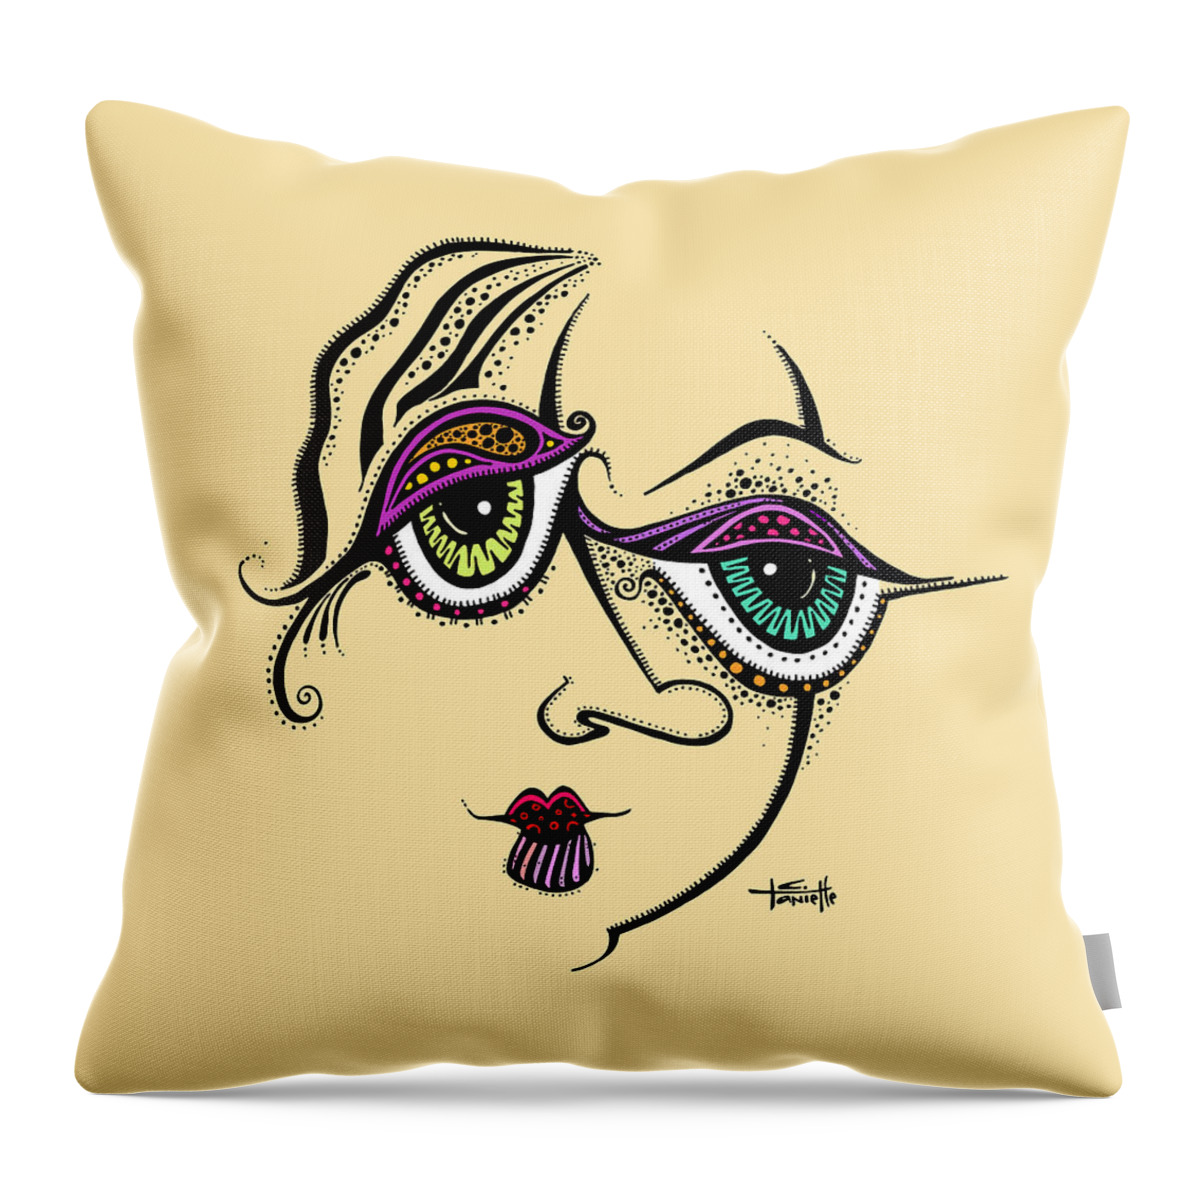 Color Added To Black And White Drawing Of Girl Throw Pillow featuring the painting Beauty in Imperfection by Tanielle Childers